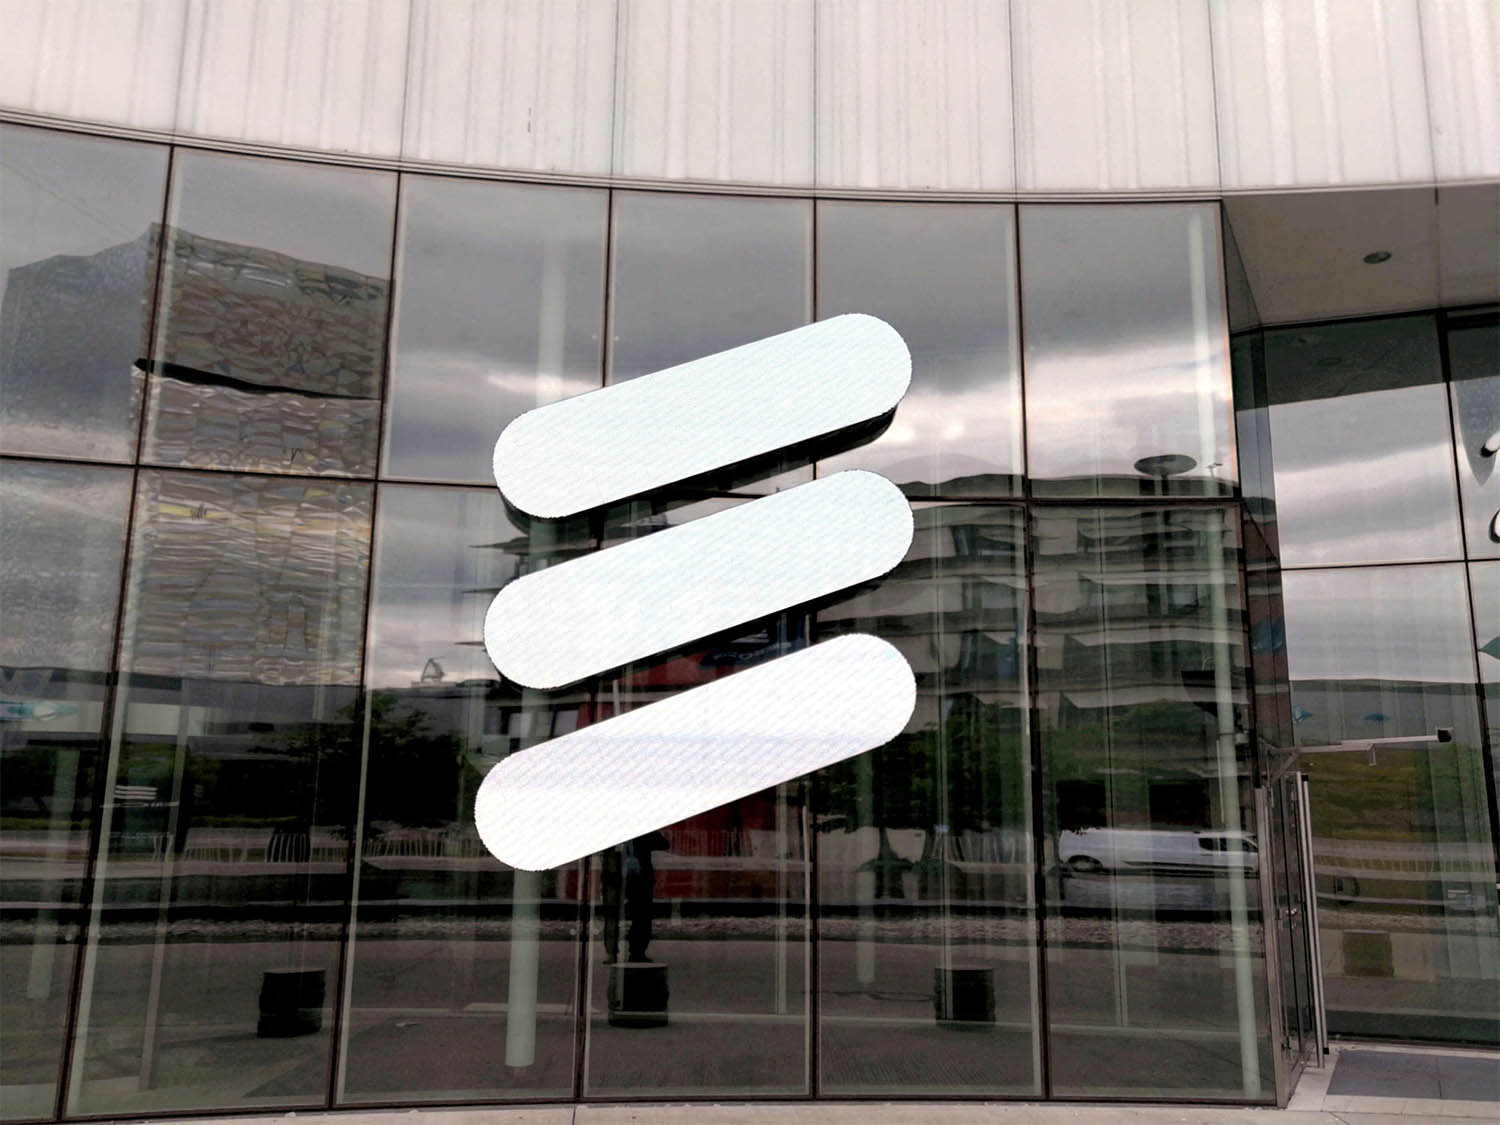 Ericsson has lost almost a third of its market value since media reports of the alleged bribes broke in February